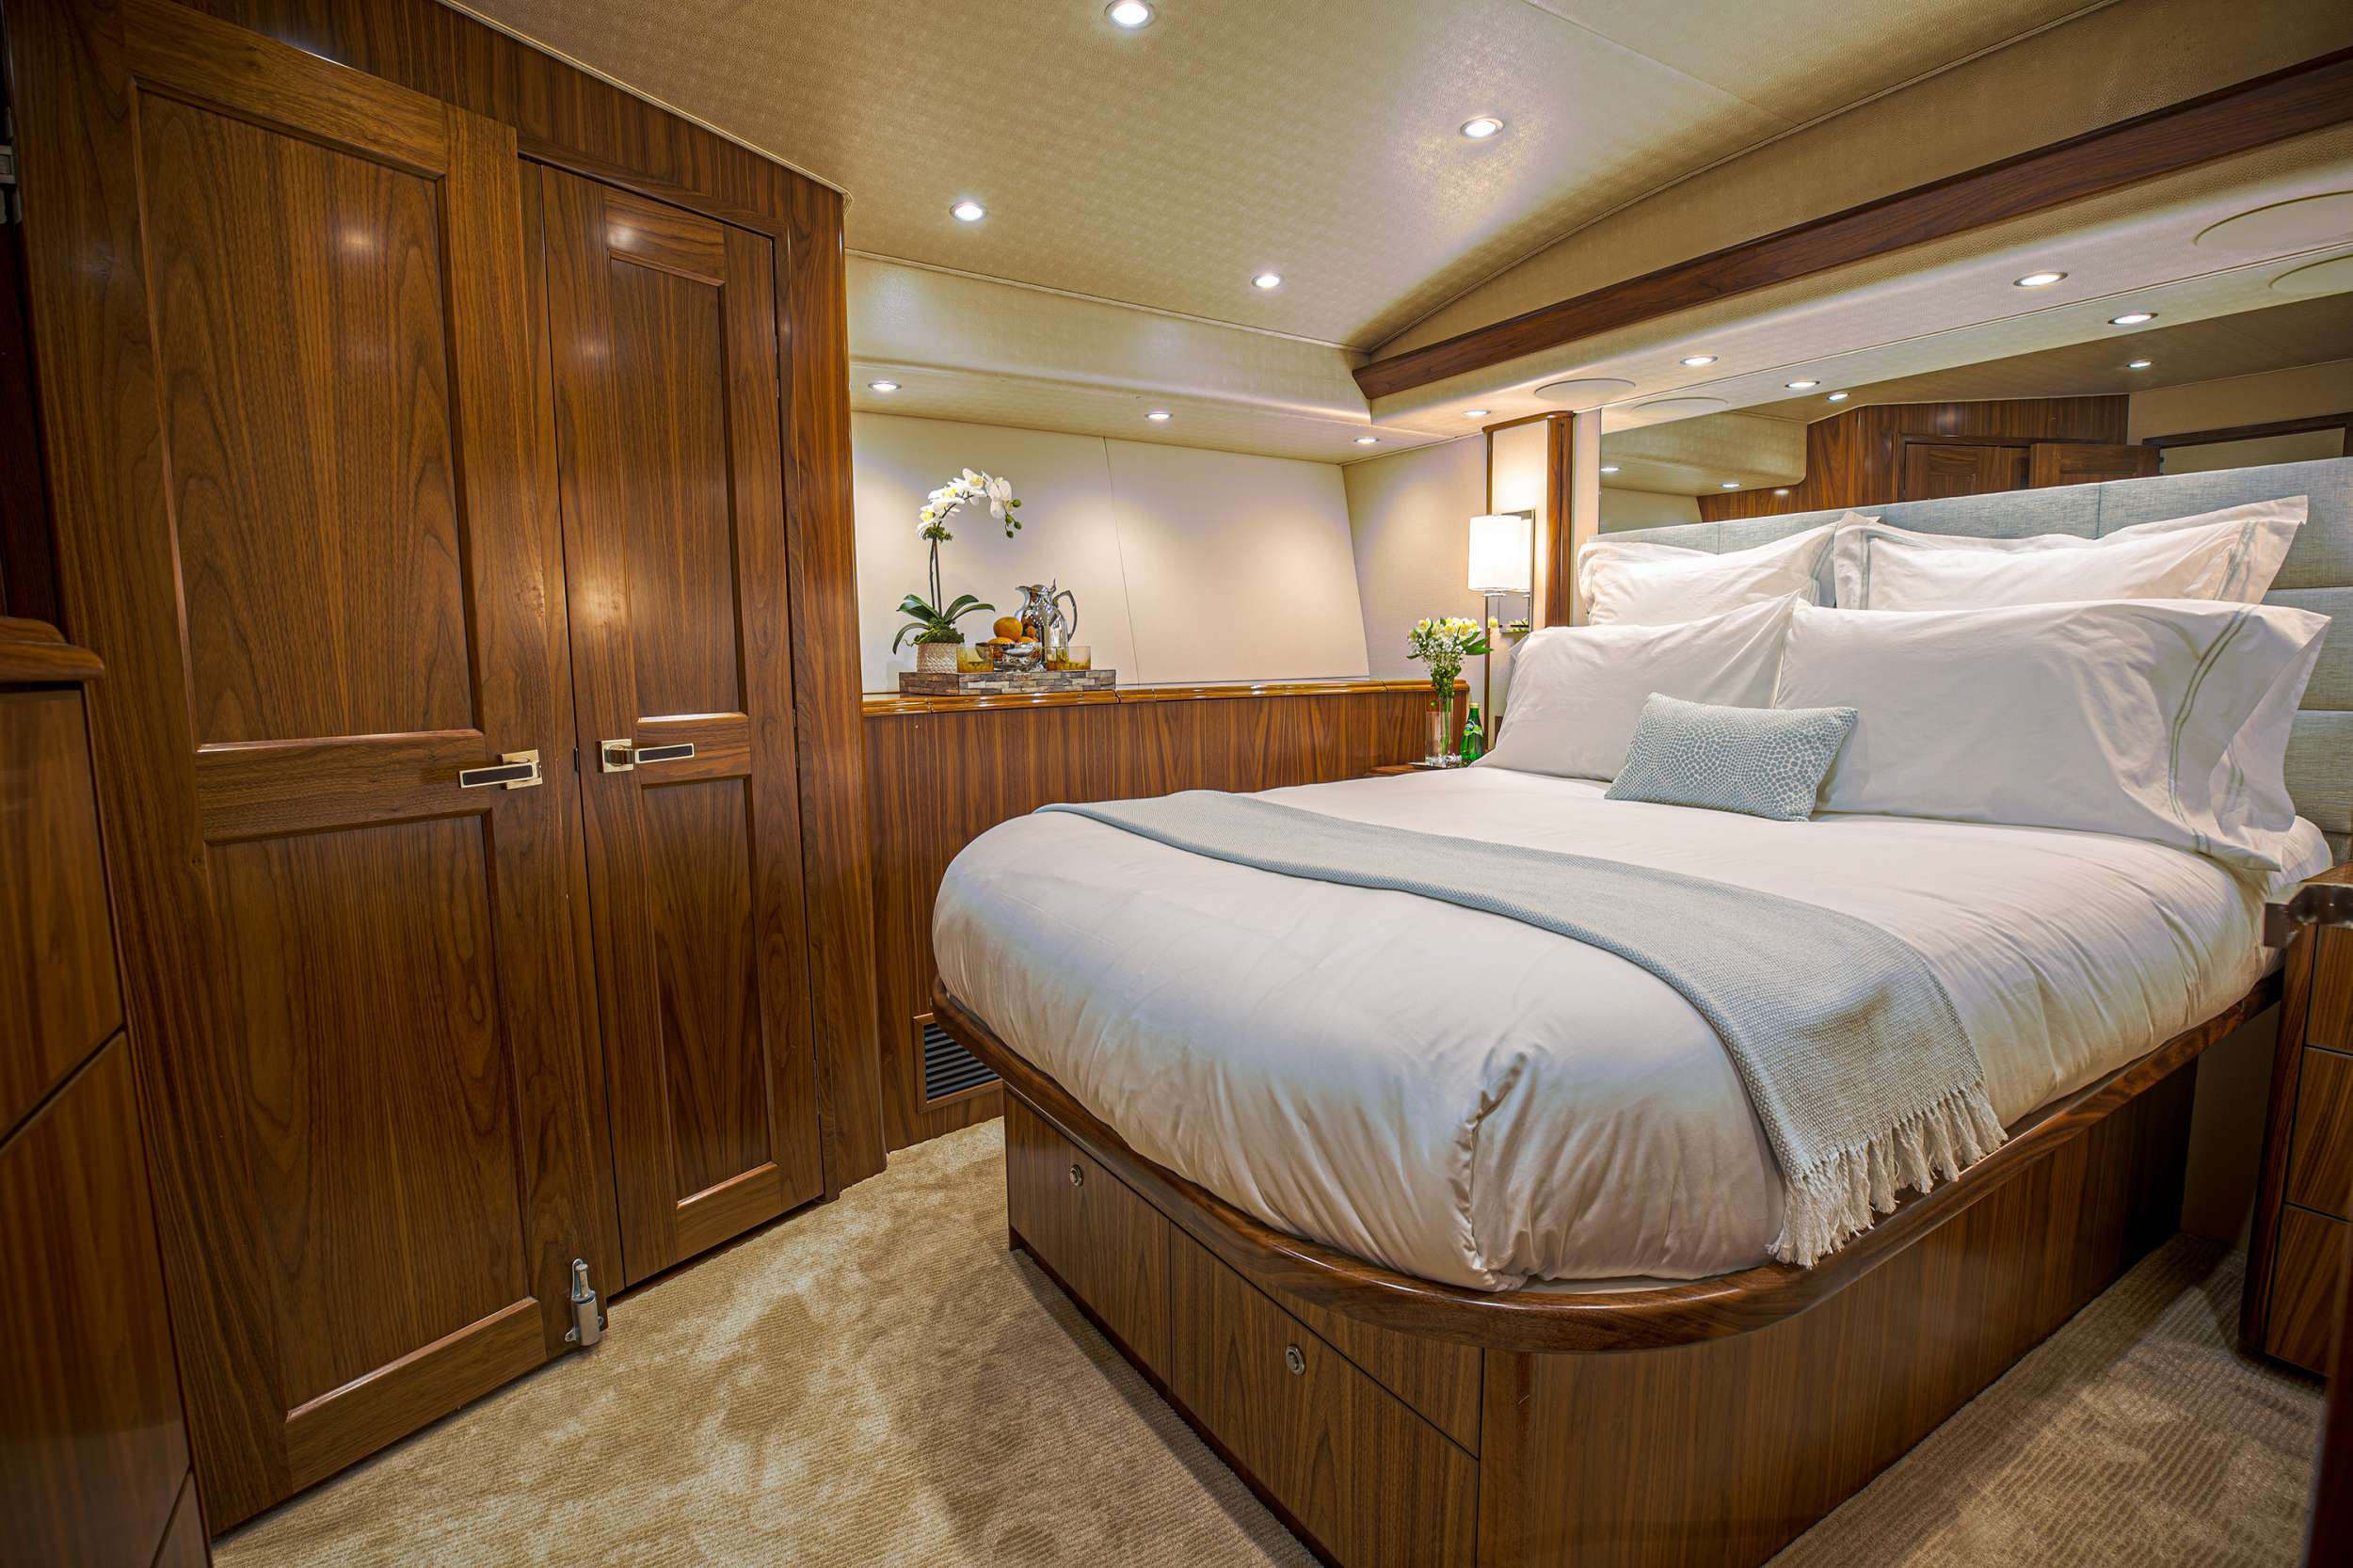 Motor Yacht 'SPECULATOR 92' Queen Stateroom, 6 PAX, 3 Crew, 92.00 Ft, 28.00 Meters, Built 2017, Viking, U.S.A, Refit Year 2020